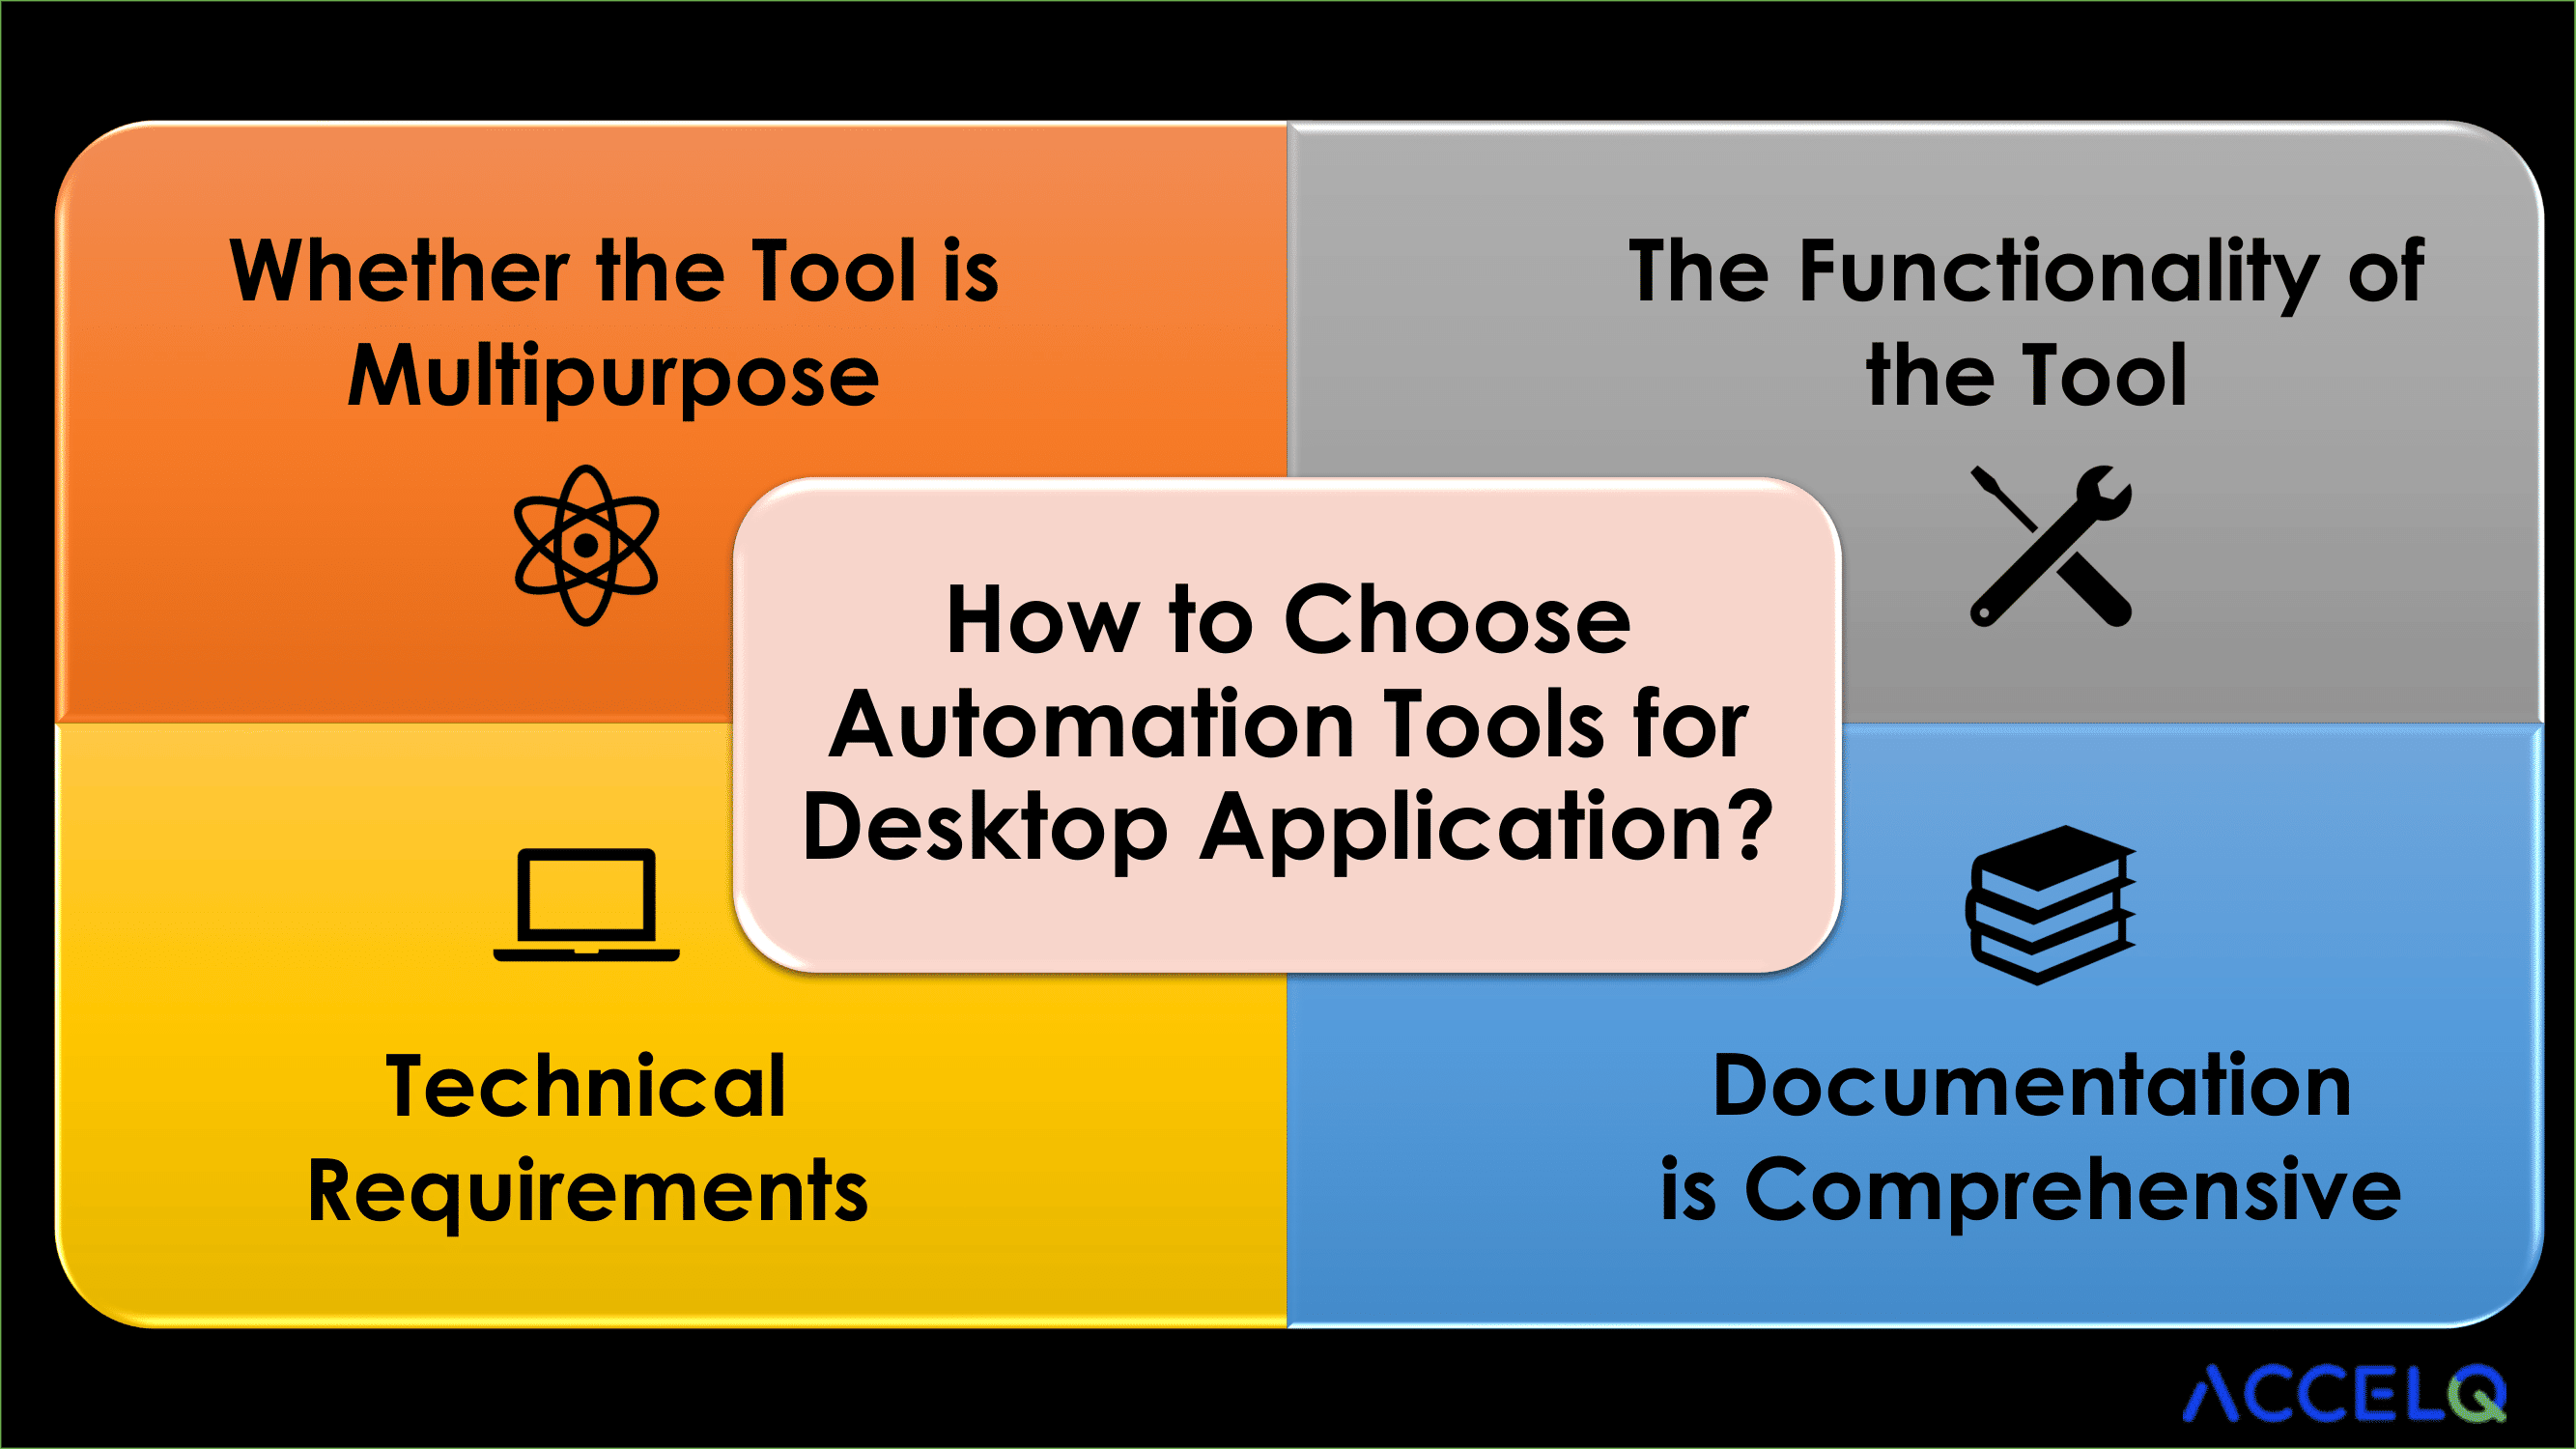 Automation Tools for Desktop Application